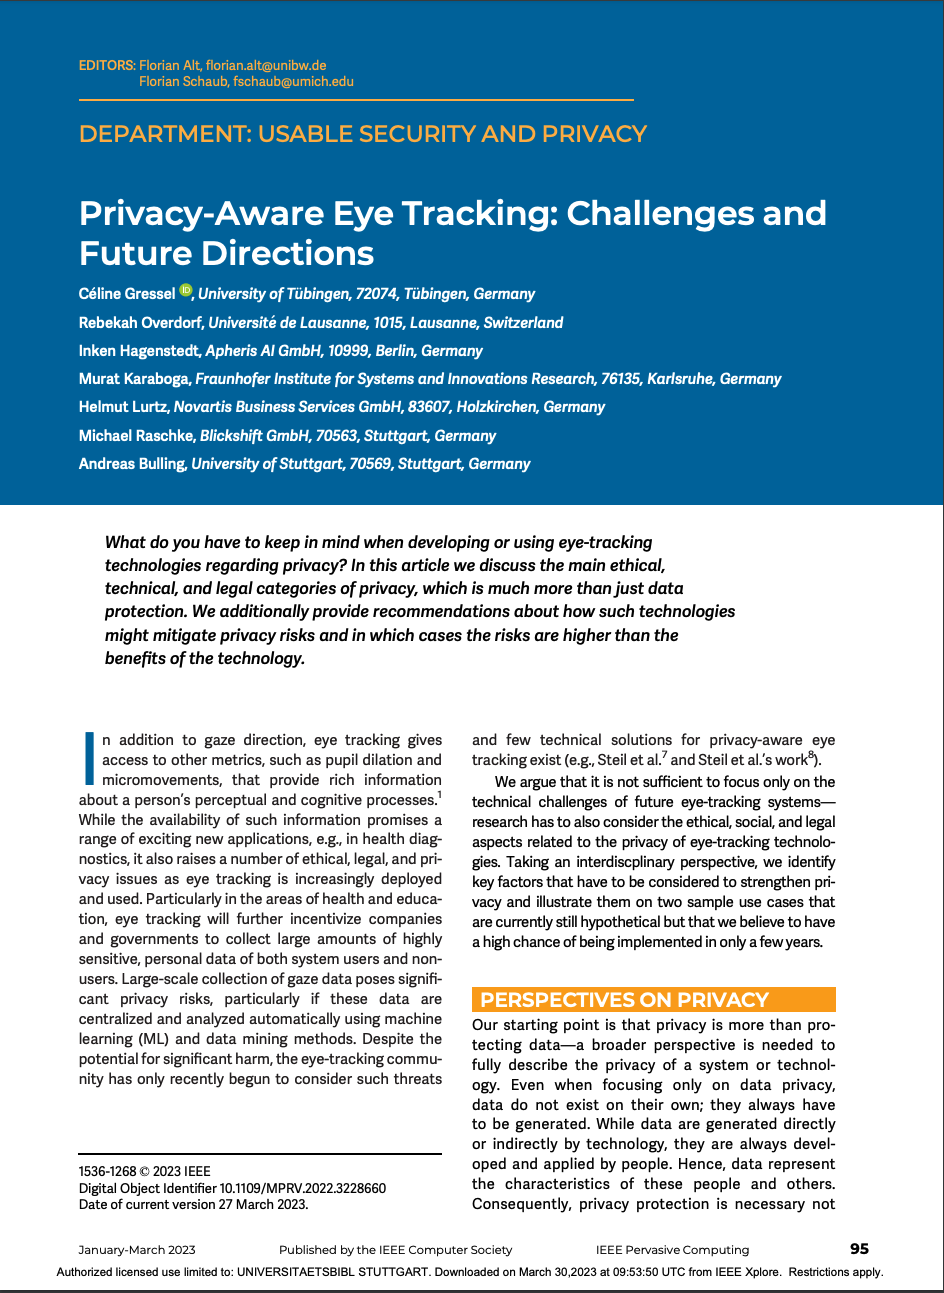 Privacy-Aware Eye Tracking: Challenges and Future Directions